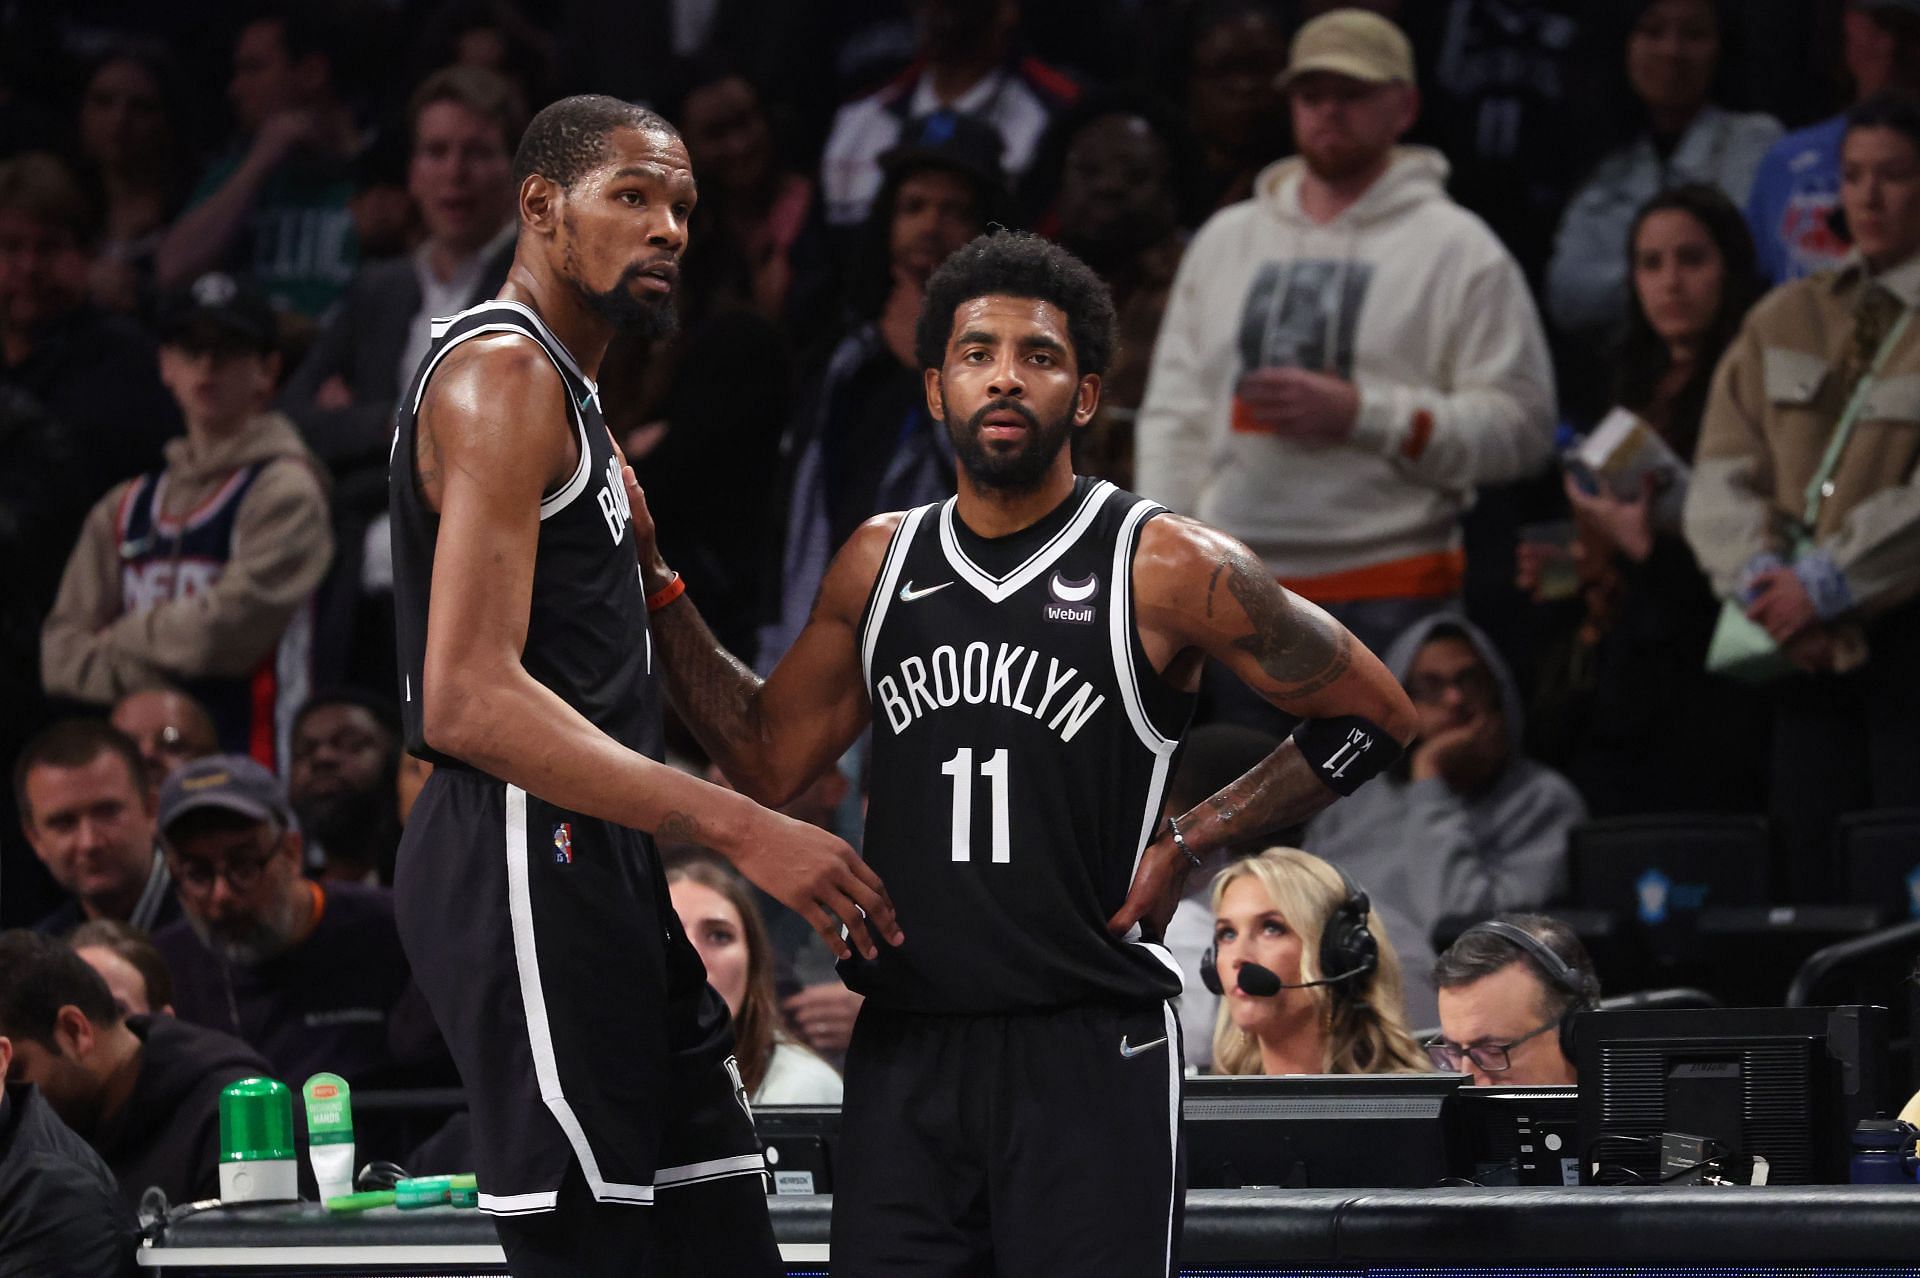 Kevin Durant #7 and Kyrie Irving #11 of the Brooklyn Nets look on in the final seconds of their 109-103 loss against the Boston Celtics during Game Three of the Eastern Conference First Round NBA Playoffs at Barclays Center on April 23, 2022 in New York City.